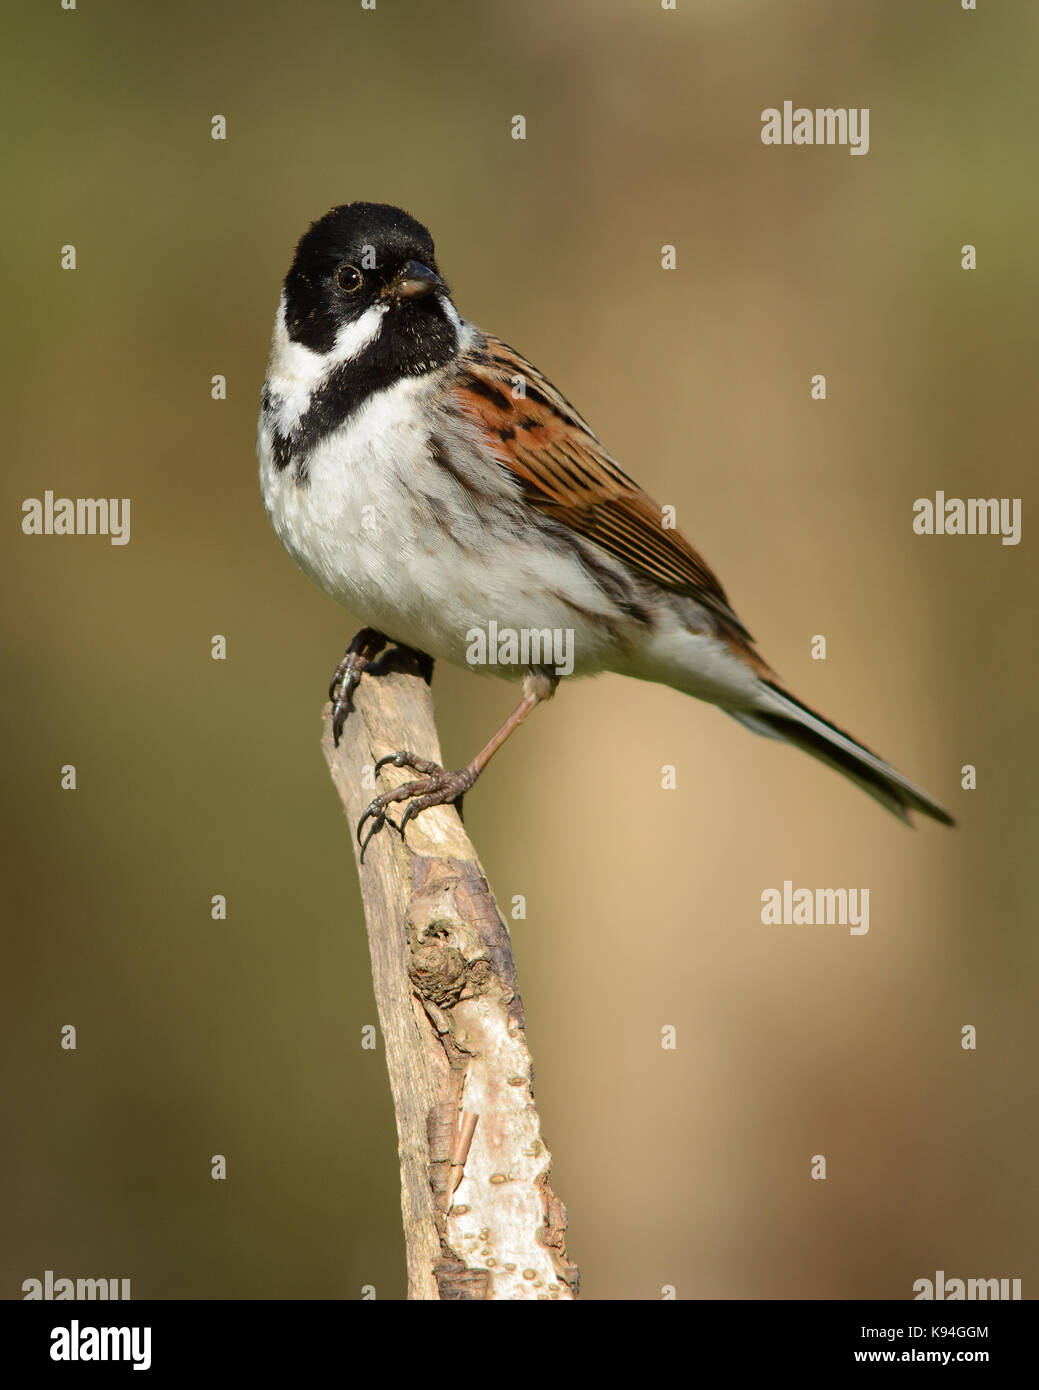 Male Common reed bunting (Emberiza schoeniclus) is a passerine bird in the bunting family Emberizidae, imaged in my garden in morning sunlight Stock Photo